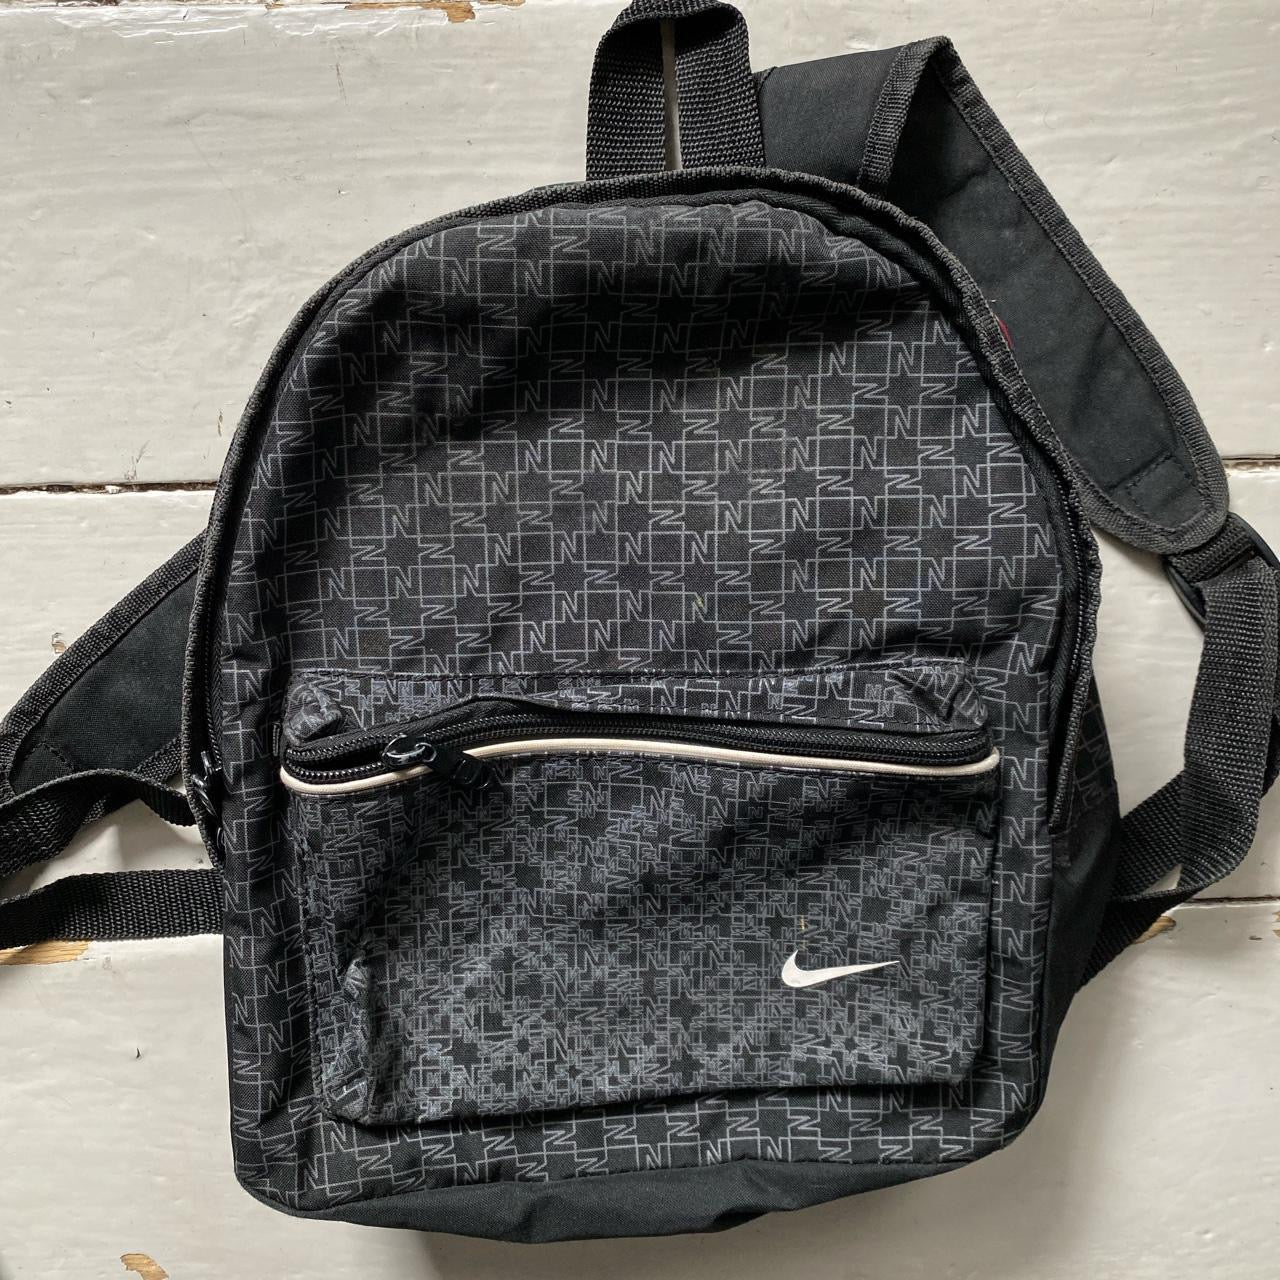 Nike Just Do It Bag